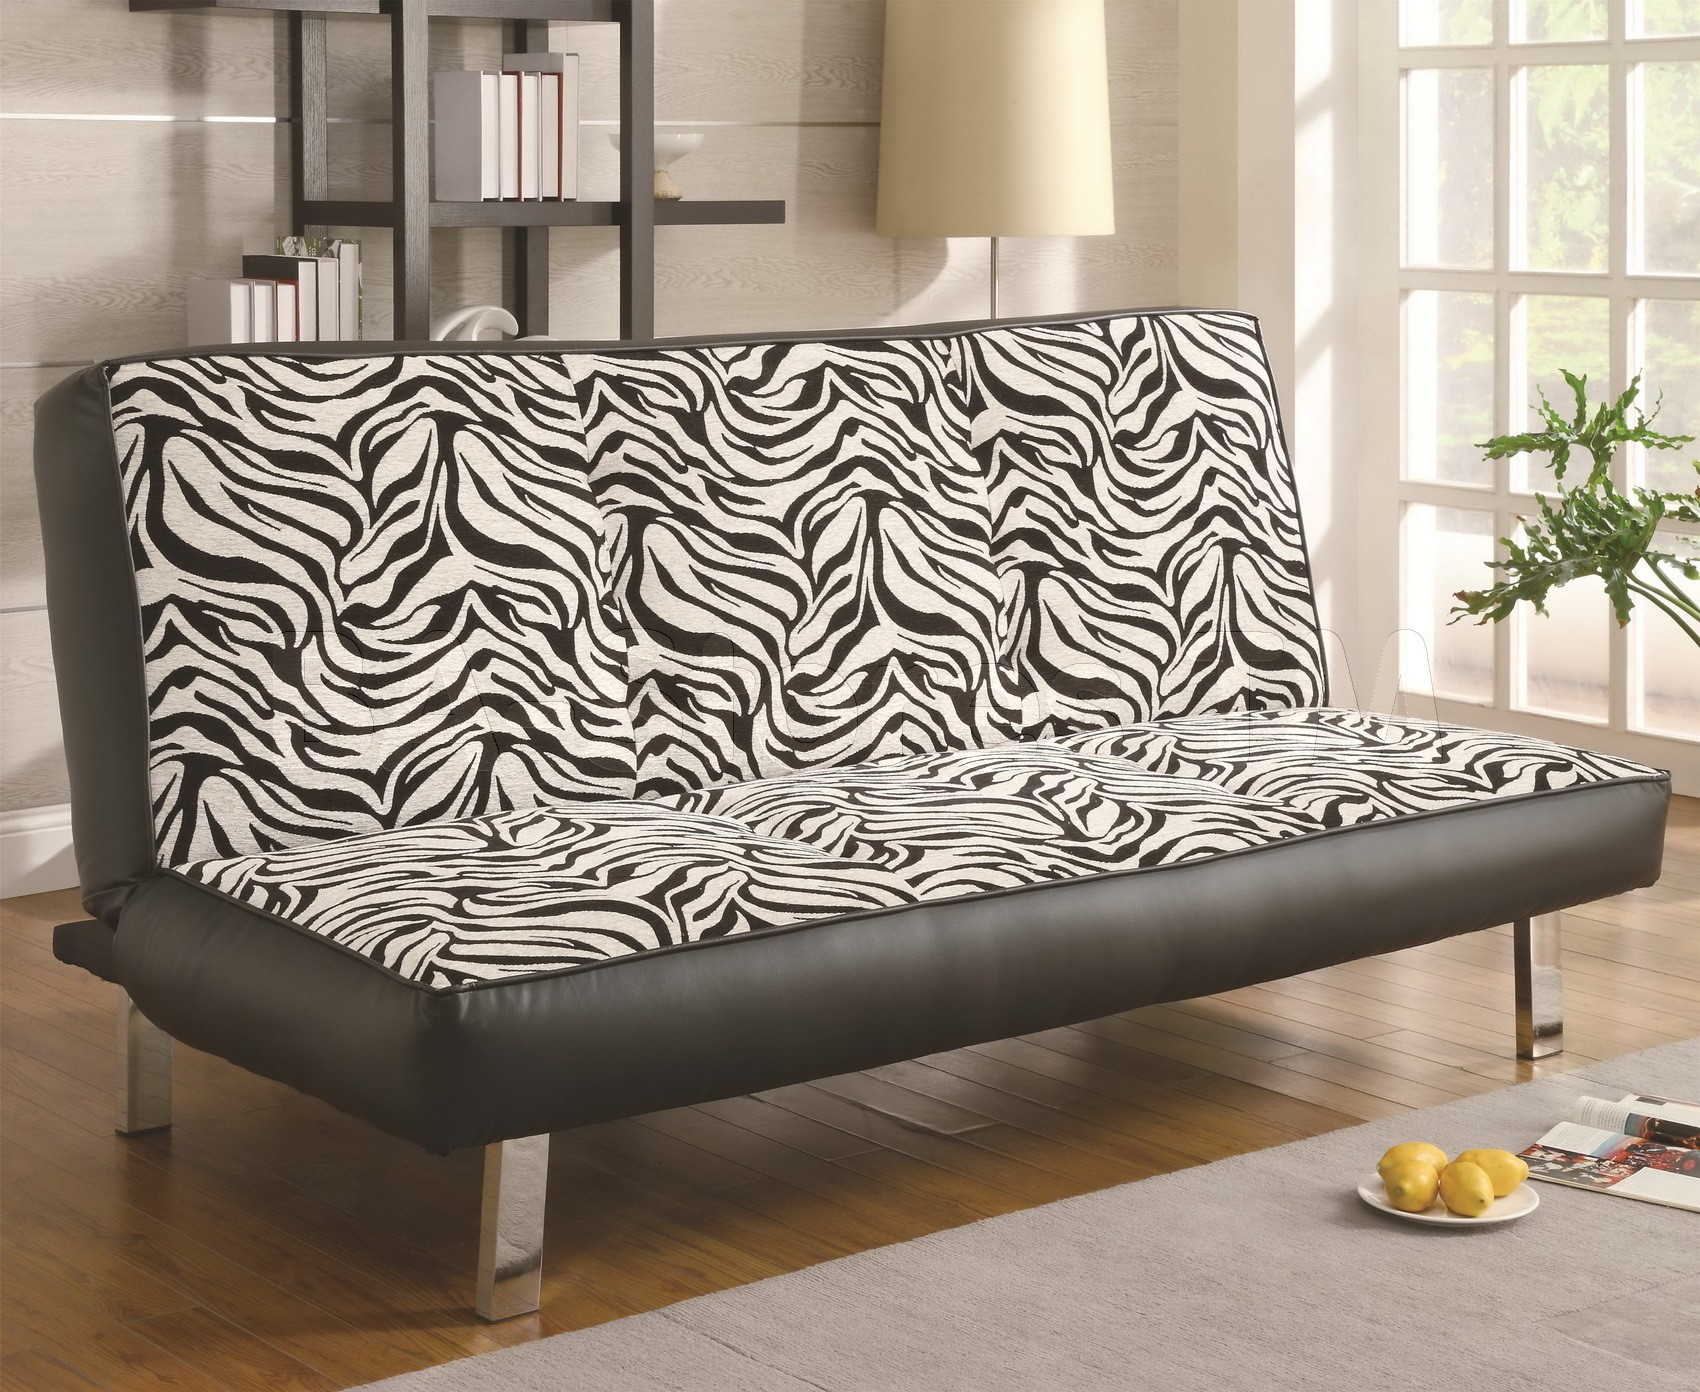 Contemporary styled sofa beds sleeper w fold down futon seat